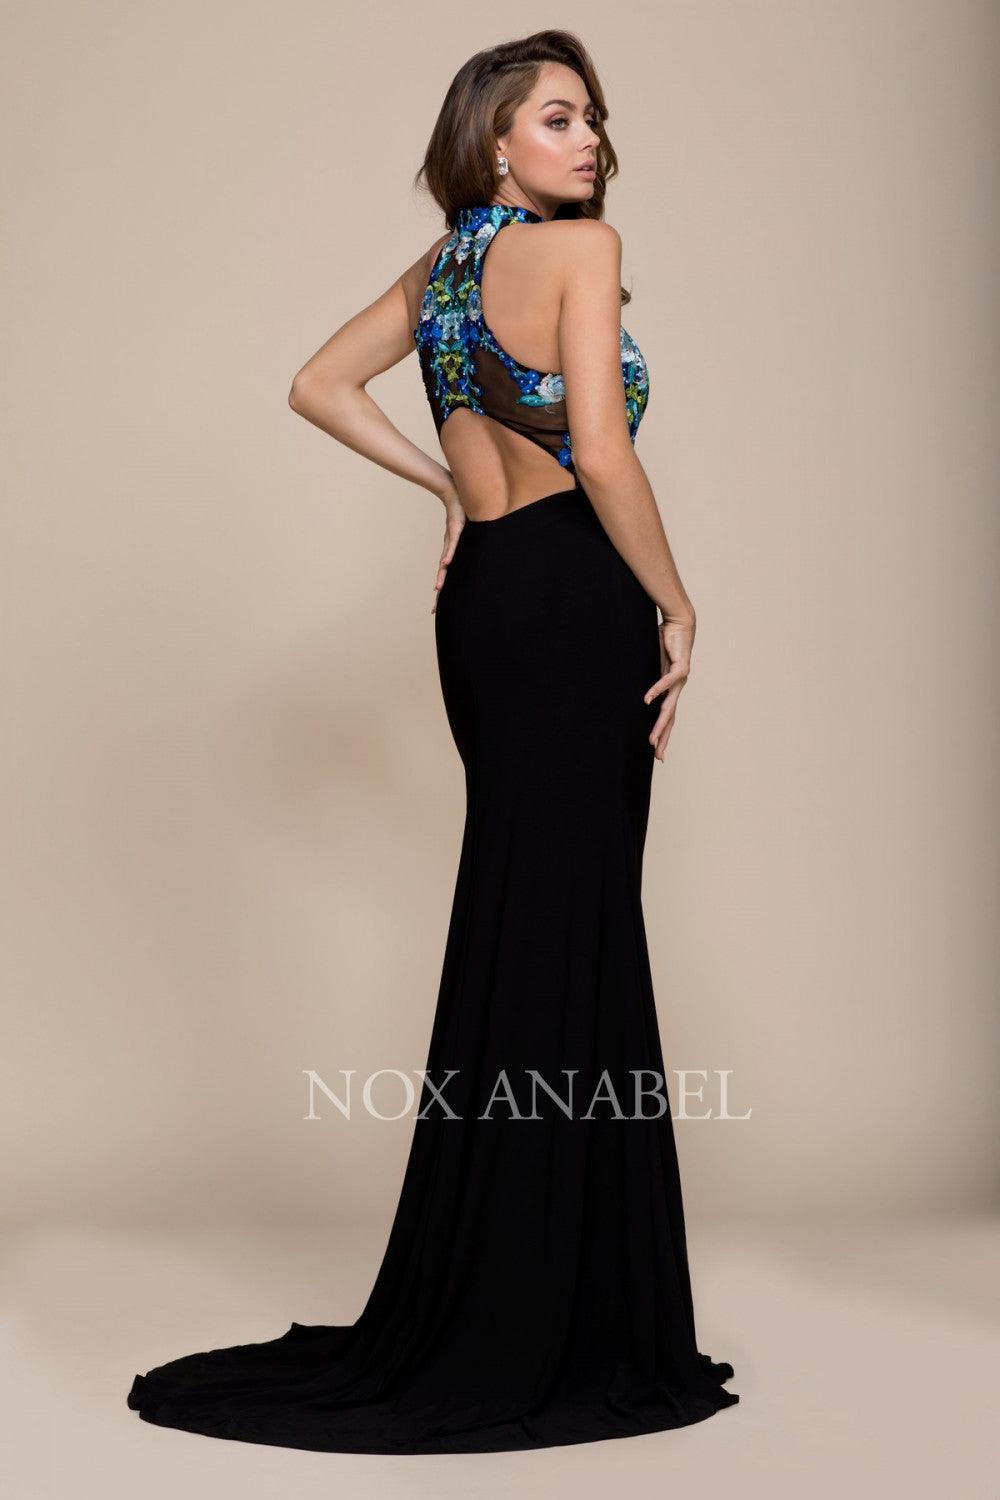 Long Open Back Prom Dress Fitted Evening Gown - The Dress Outlet Nox Anabel